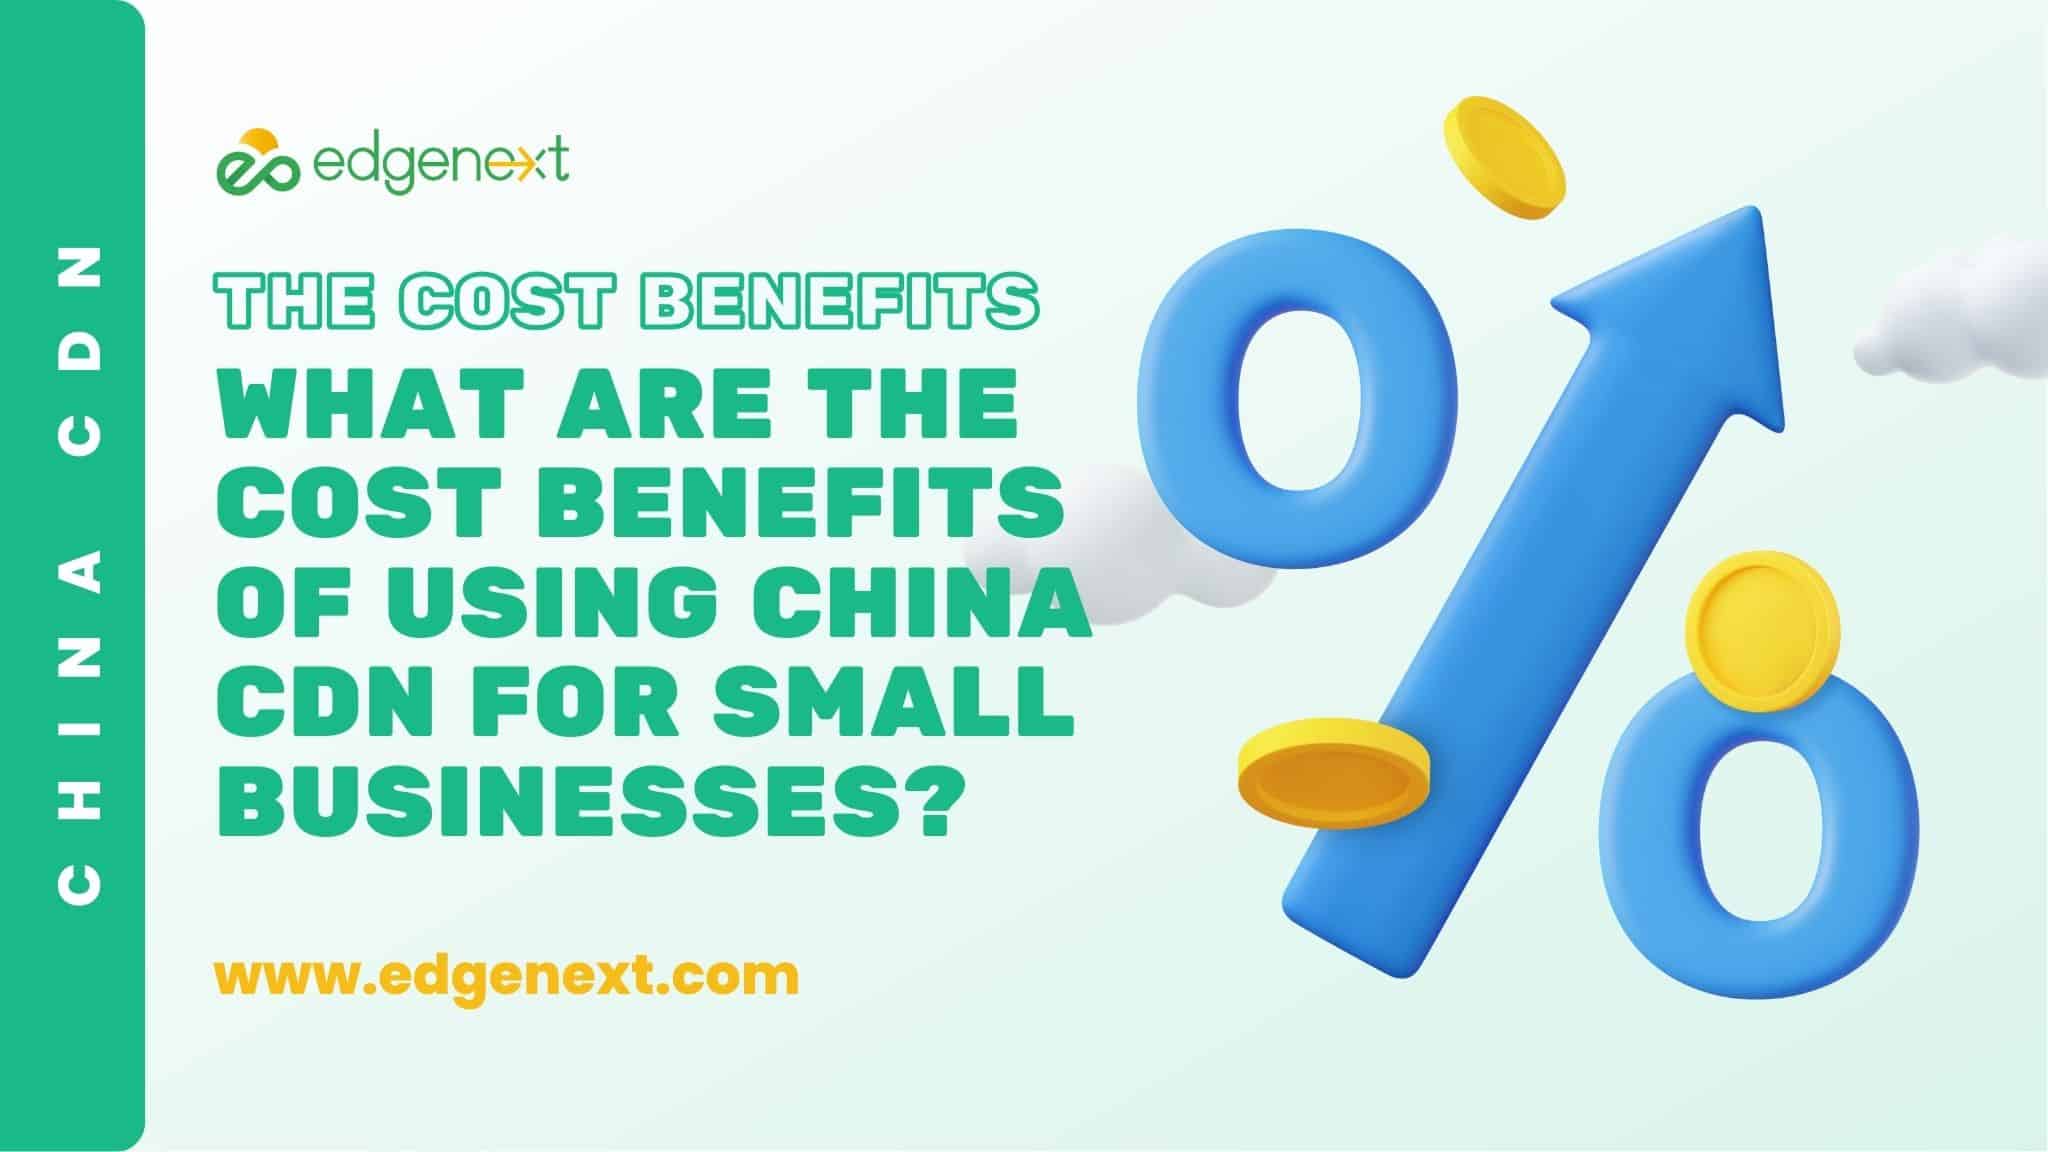 What Are the Cost Benefits of Using China CDN for Small Businesses?